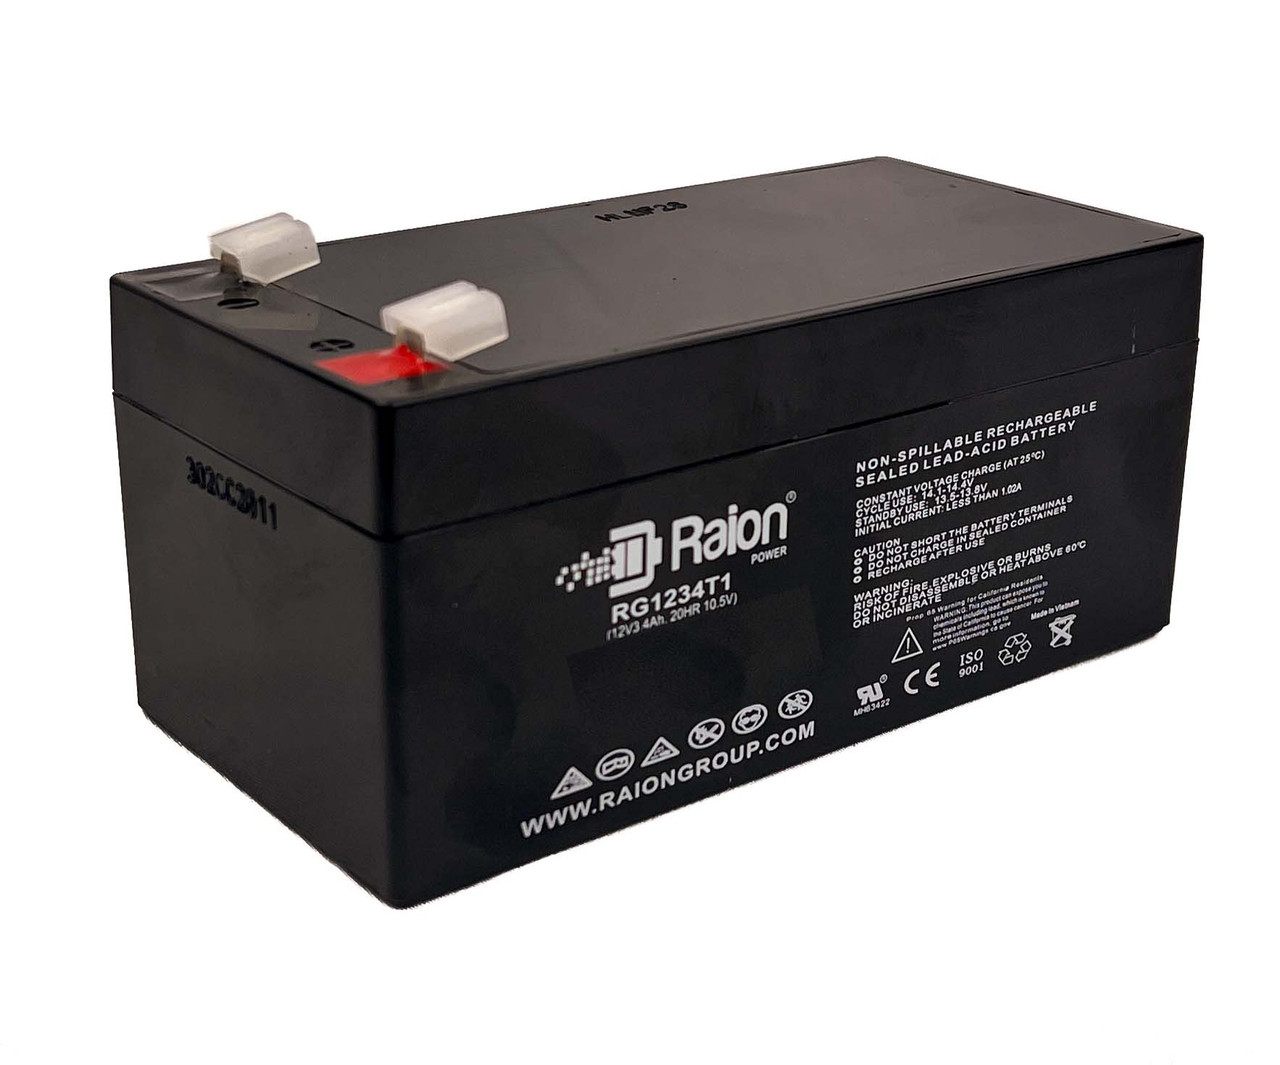 Raion Power 12V 3.4Ah Non-Spillable Replacement Battery for Ohio Medical Tote-L-Vac Portable Suction